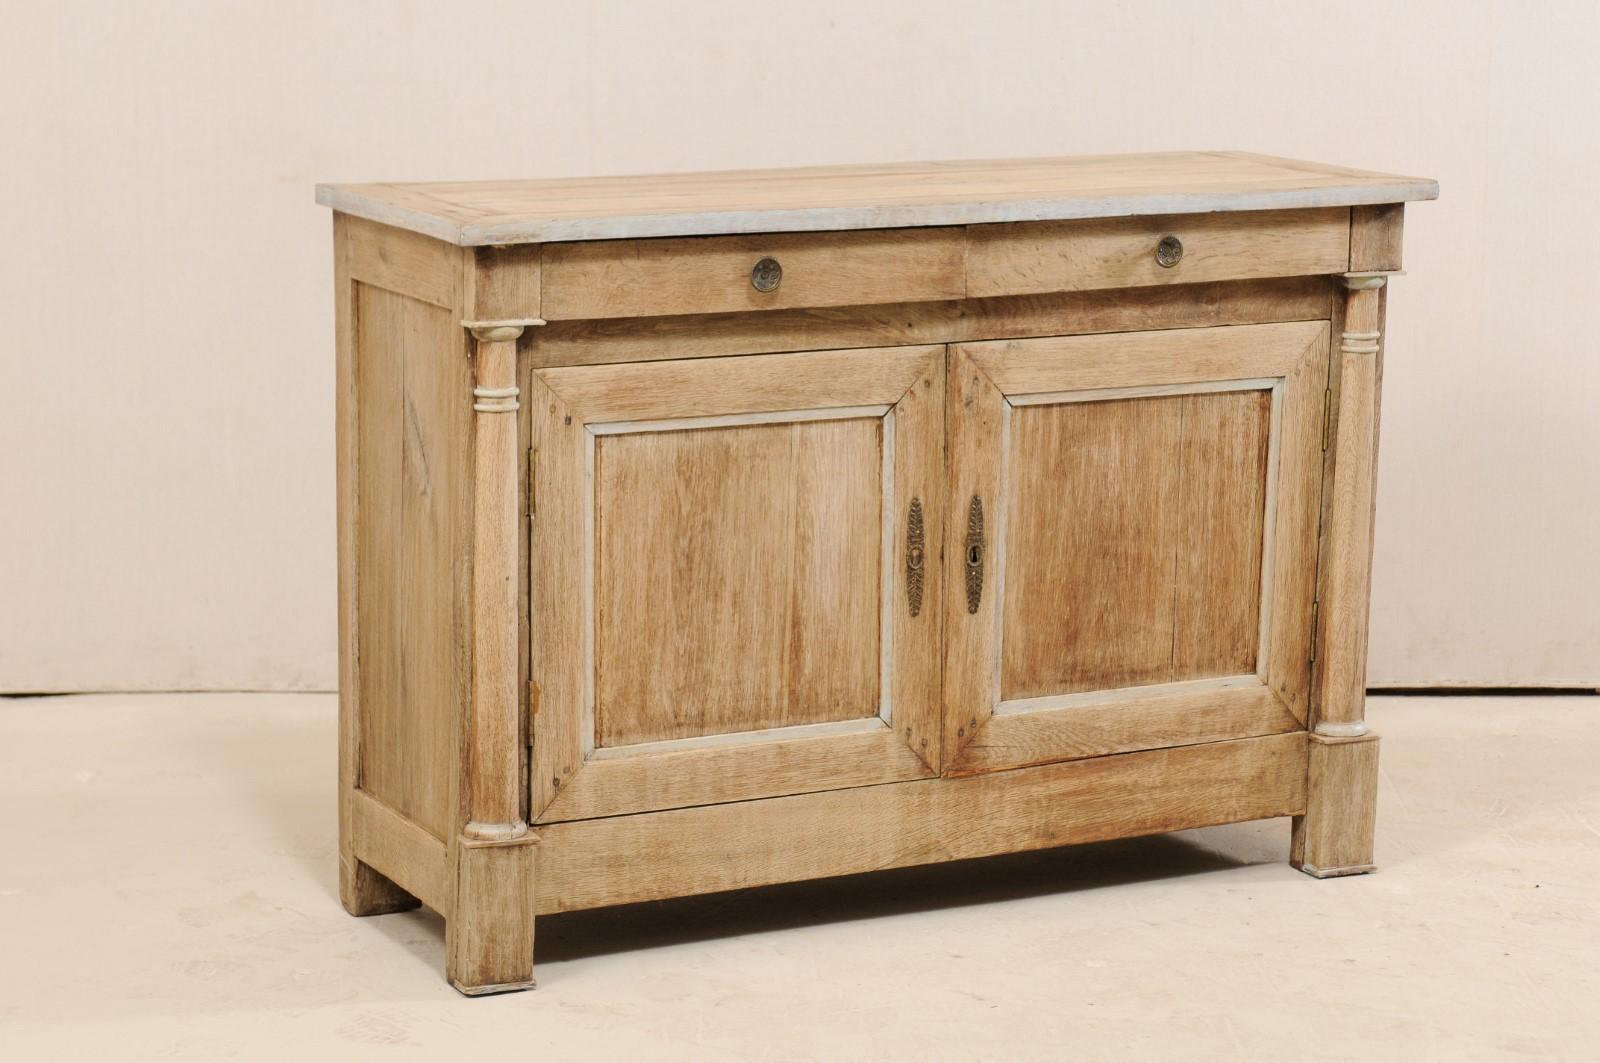 A French 4.5 ff long credenza cabinet from the early 19th century. This antique buffet cabinet from France has a rectangular-shaped top overhanging the body/case below which houses a pair of small half-drawers at top above a pair of recessed panel